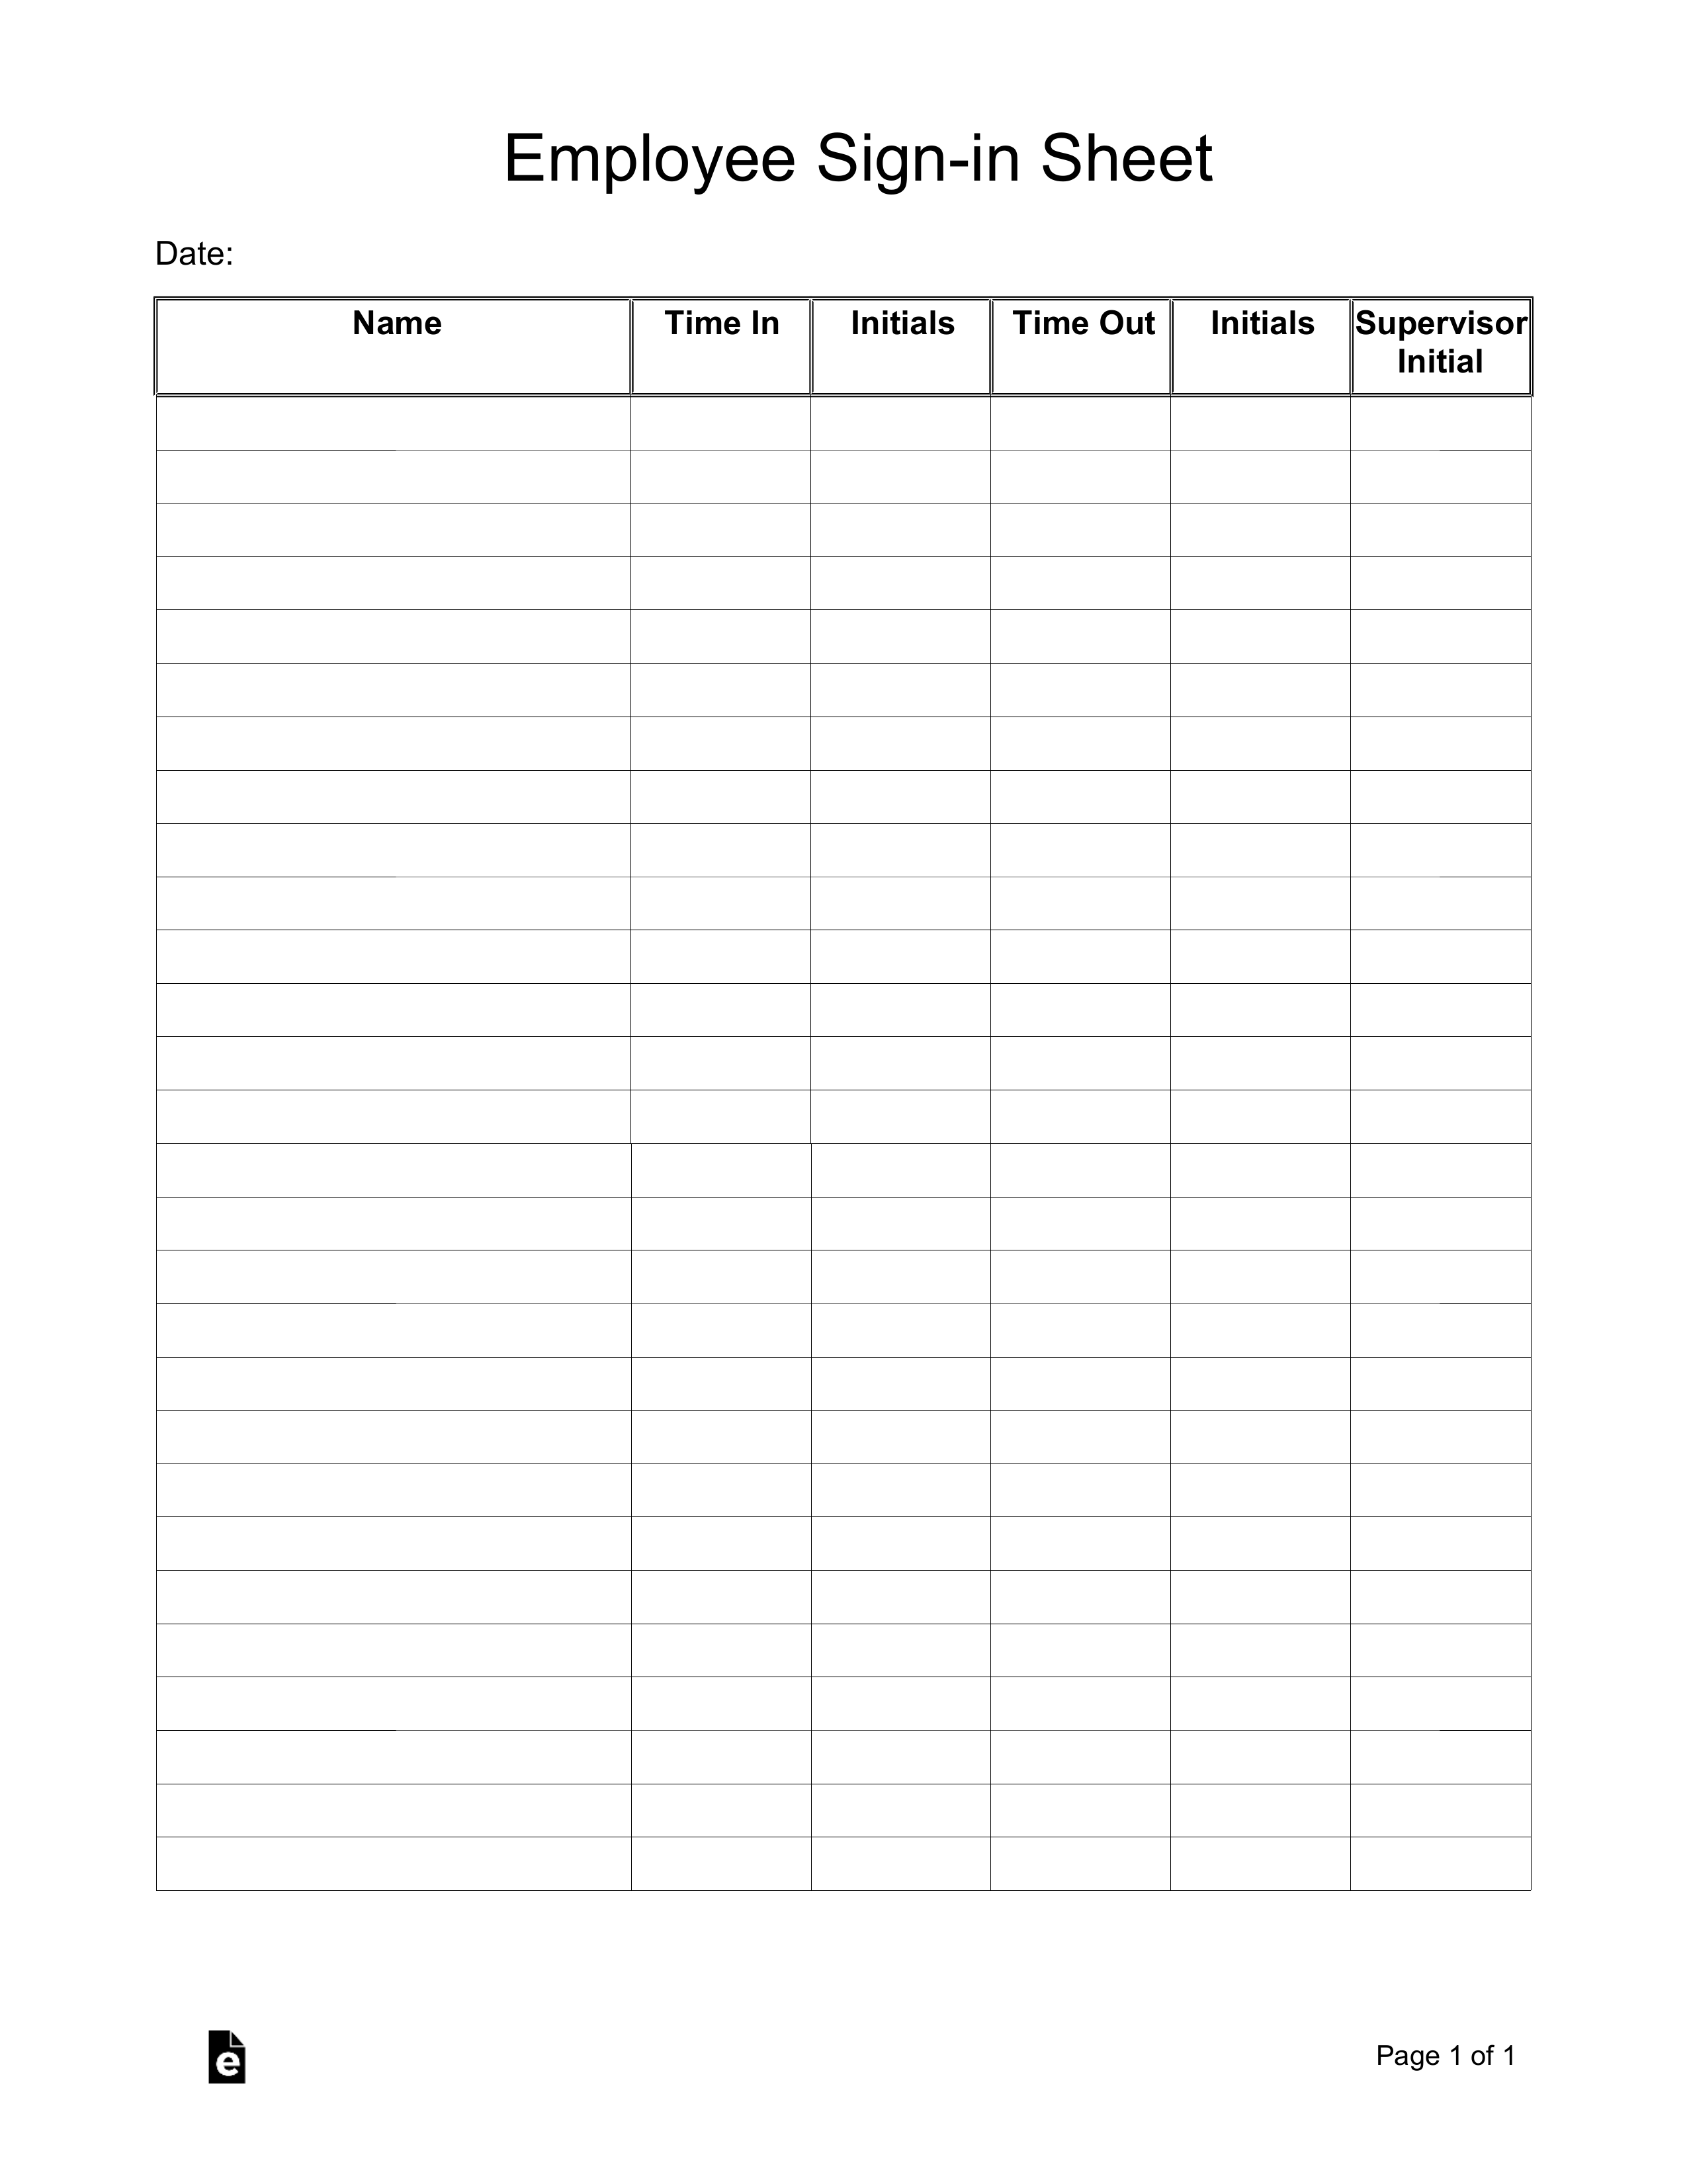 Free Employee Sign-in Sheet Template - PDF  Word – eForms Throughout Free Sign Up Sheet Template Word